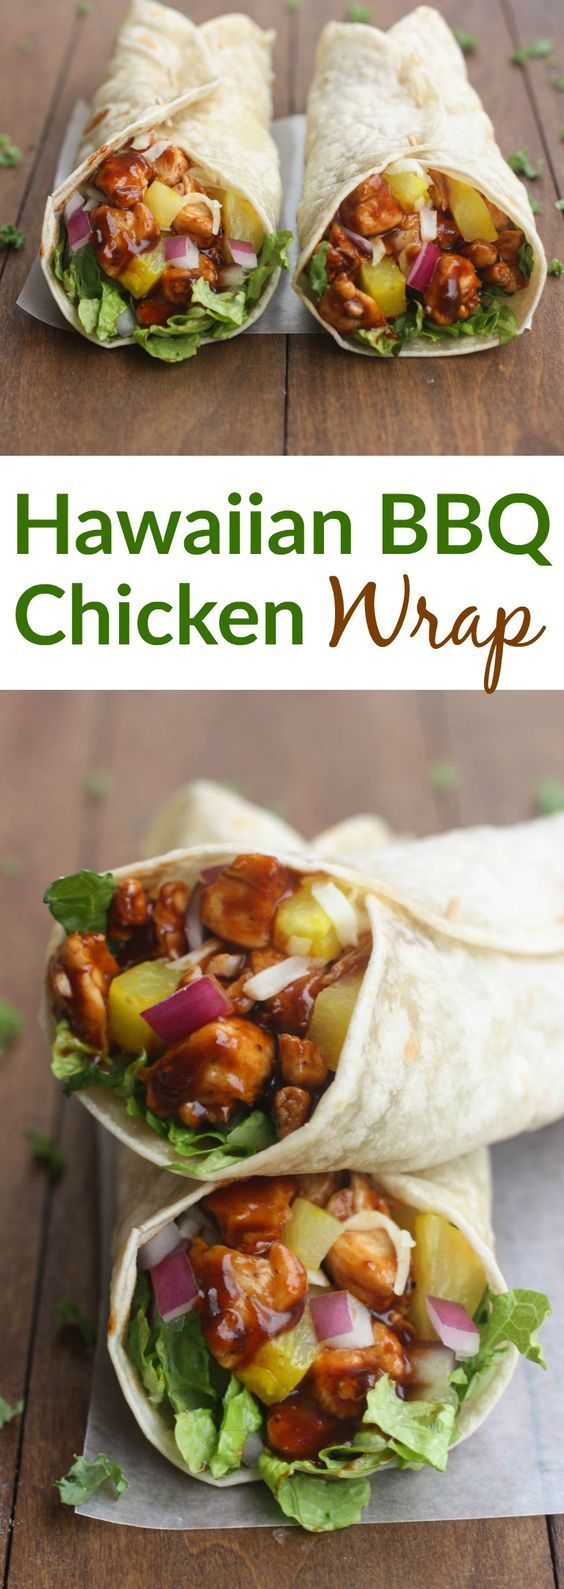 Nothing better than a little Hawaiian twist to BBQ chicken, layered inside a tasty wrap! These Hawaiian BBQ Chicken Wraps are EASY, healthy and delicious.| Tastes Better From Scratch: